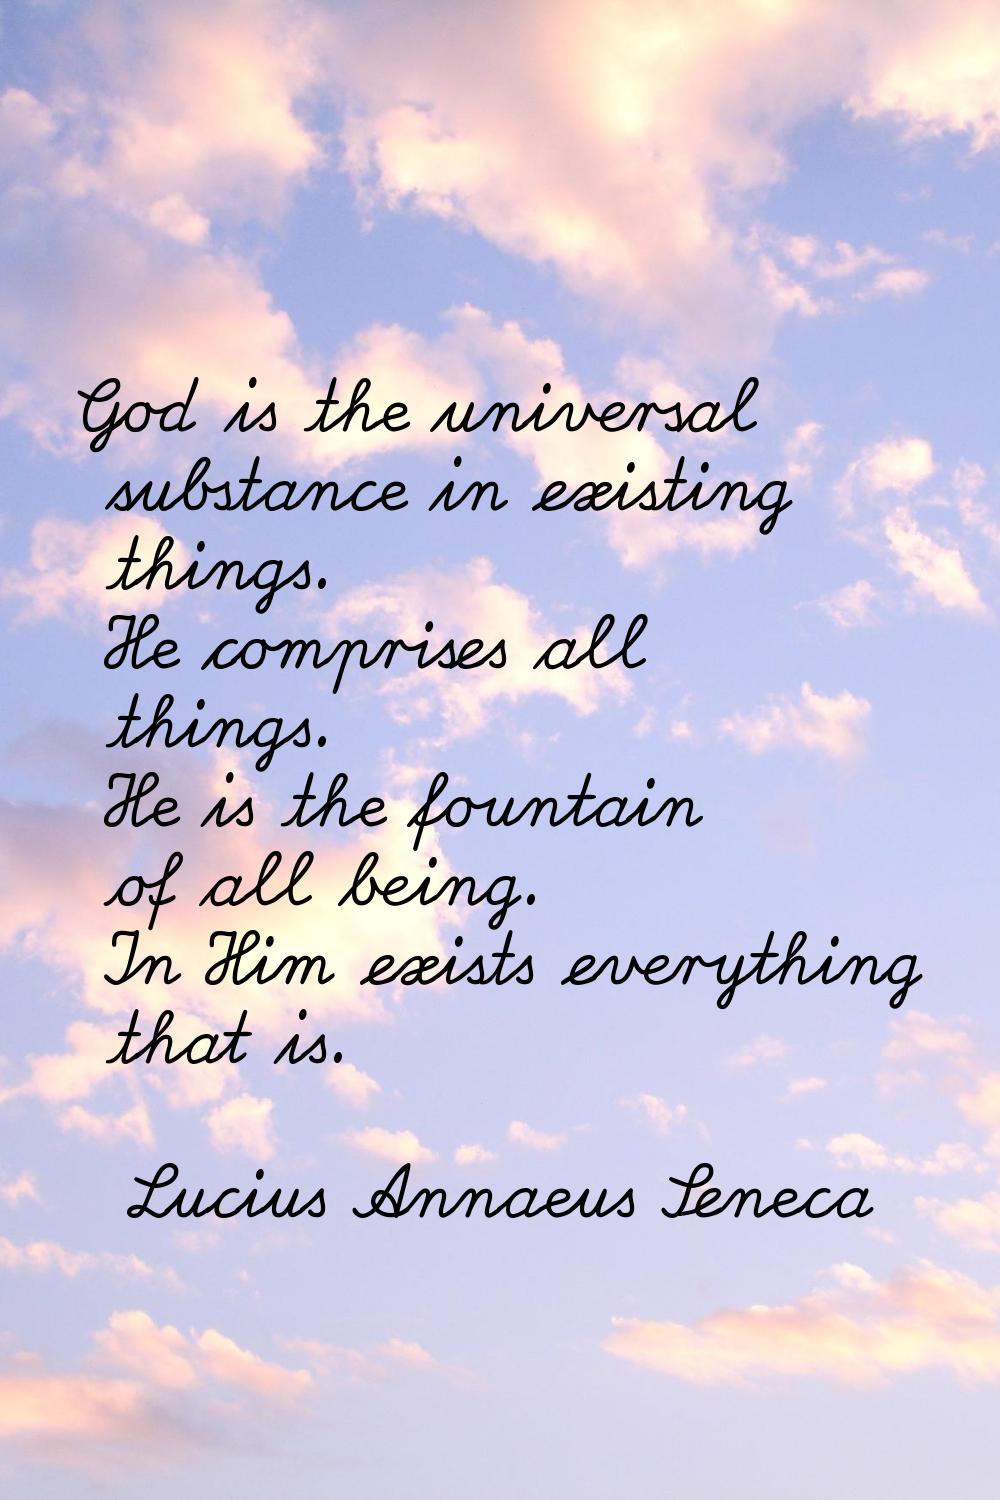 God is the universal substance in existing things. He comprises all things. He is the fountain of a